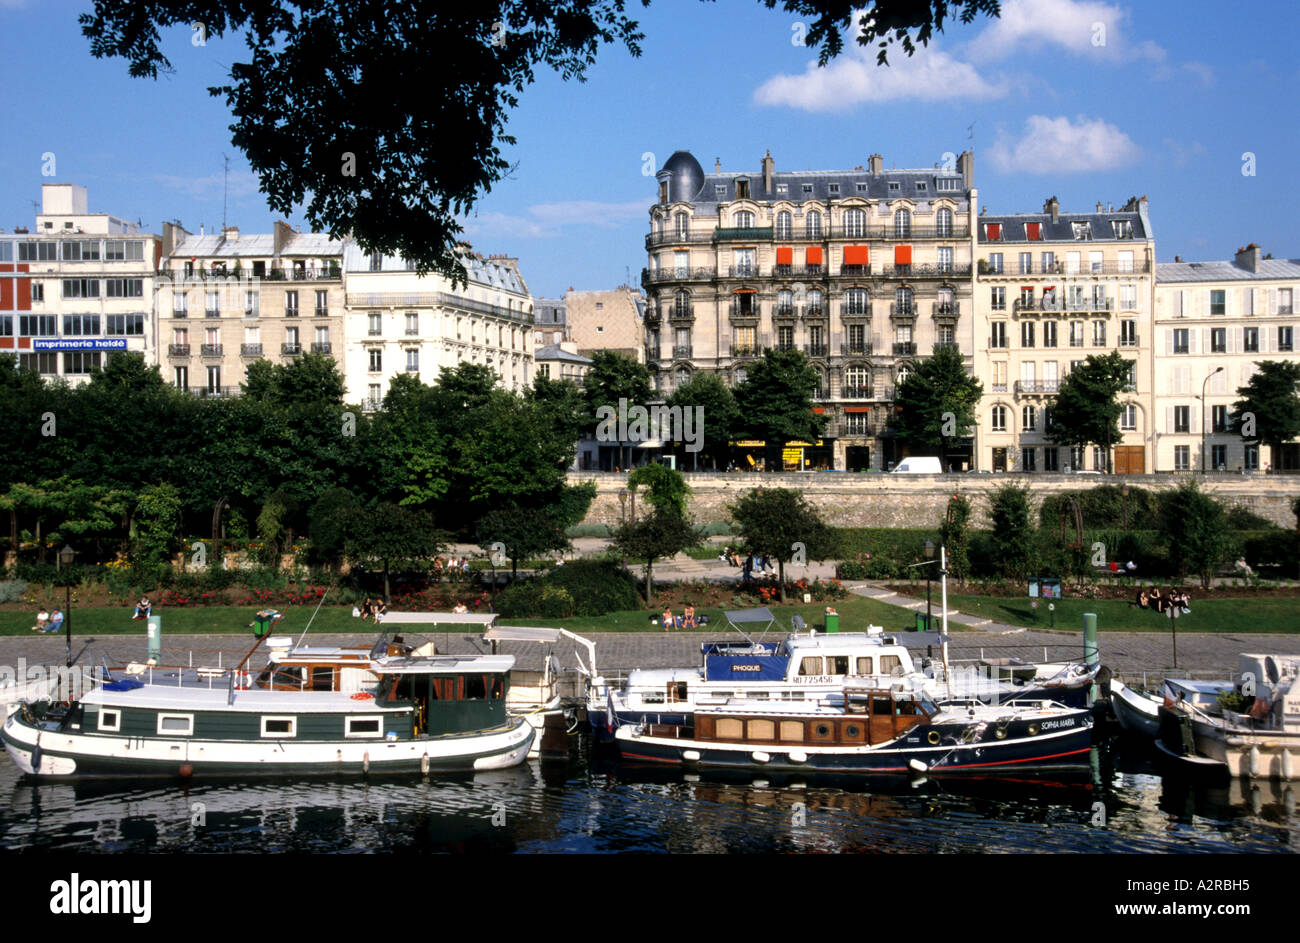 Boats, House, Boats, Peniches, St, Martin,  Canal, Waterway, to, assemble, Parisian Stock Photo